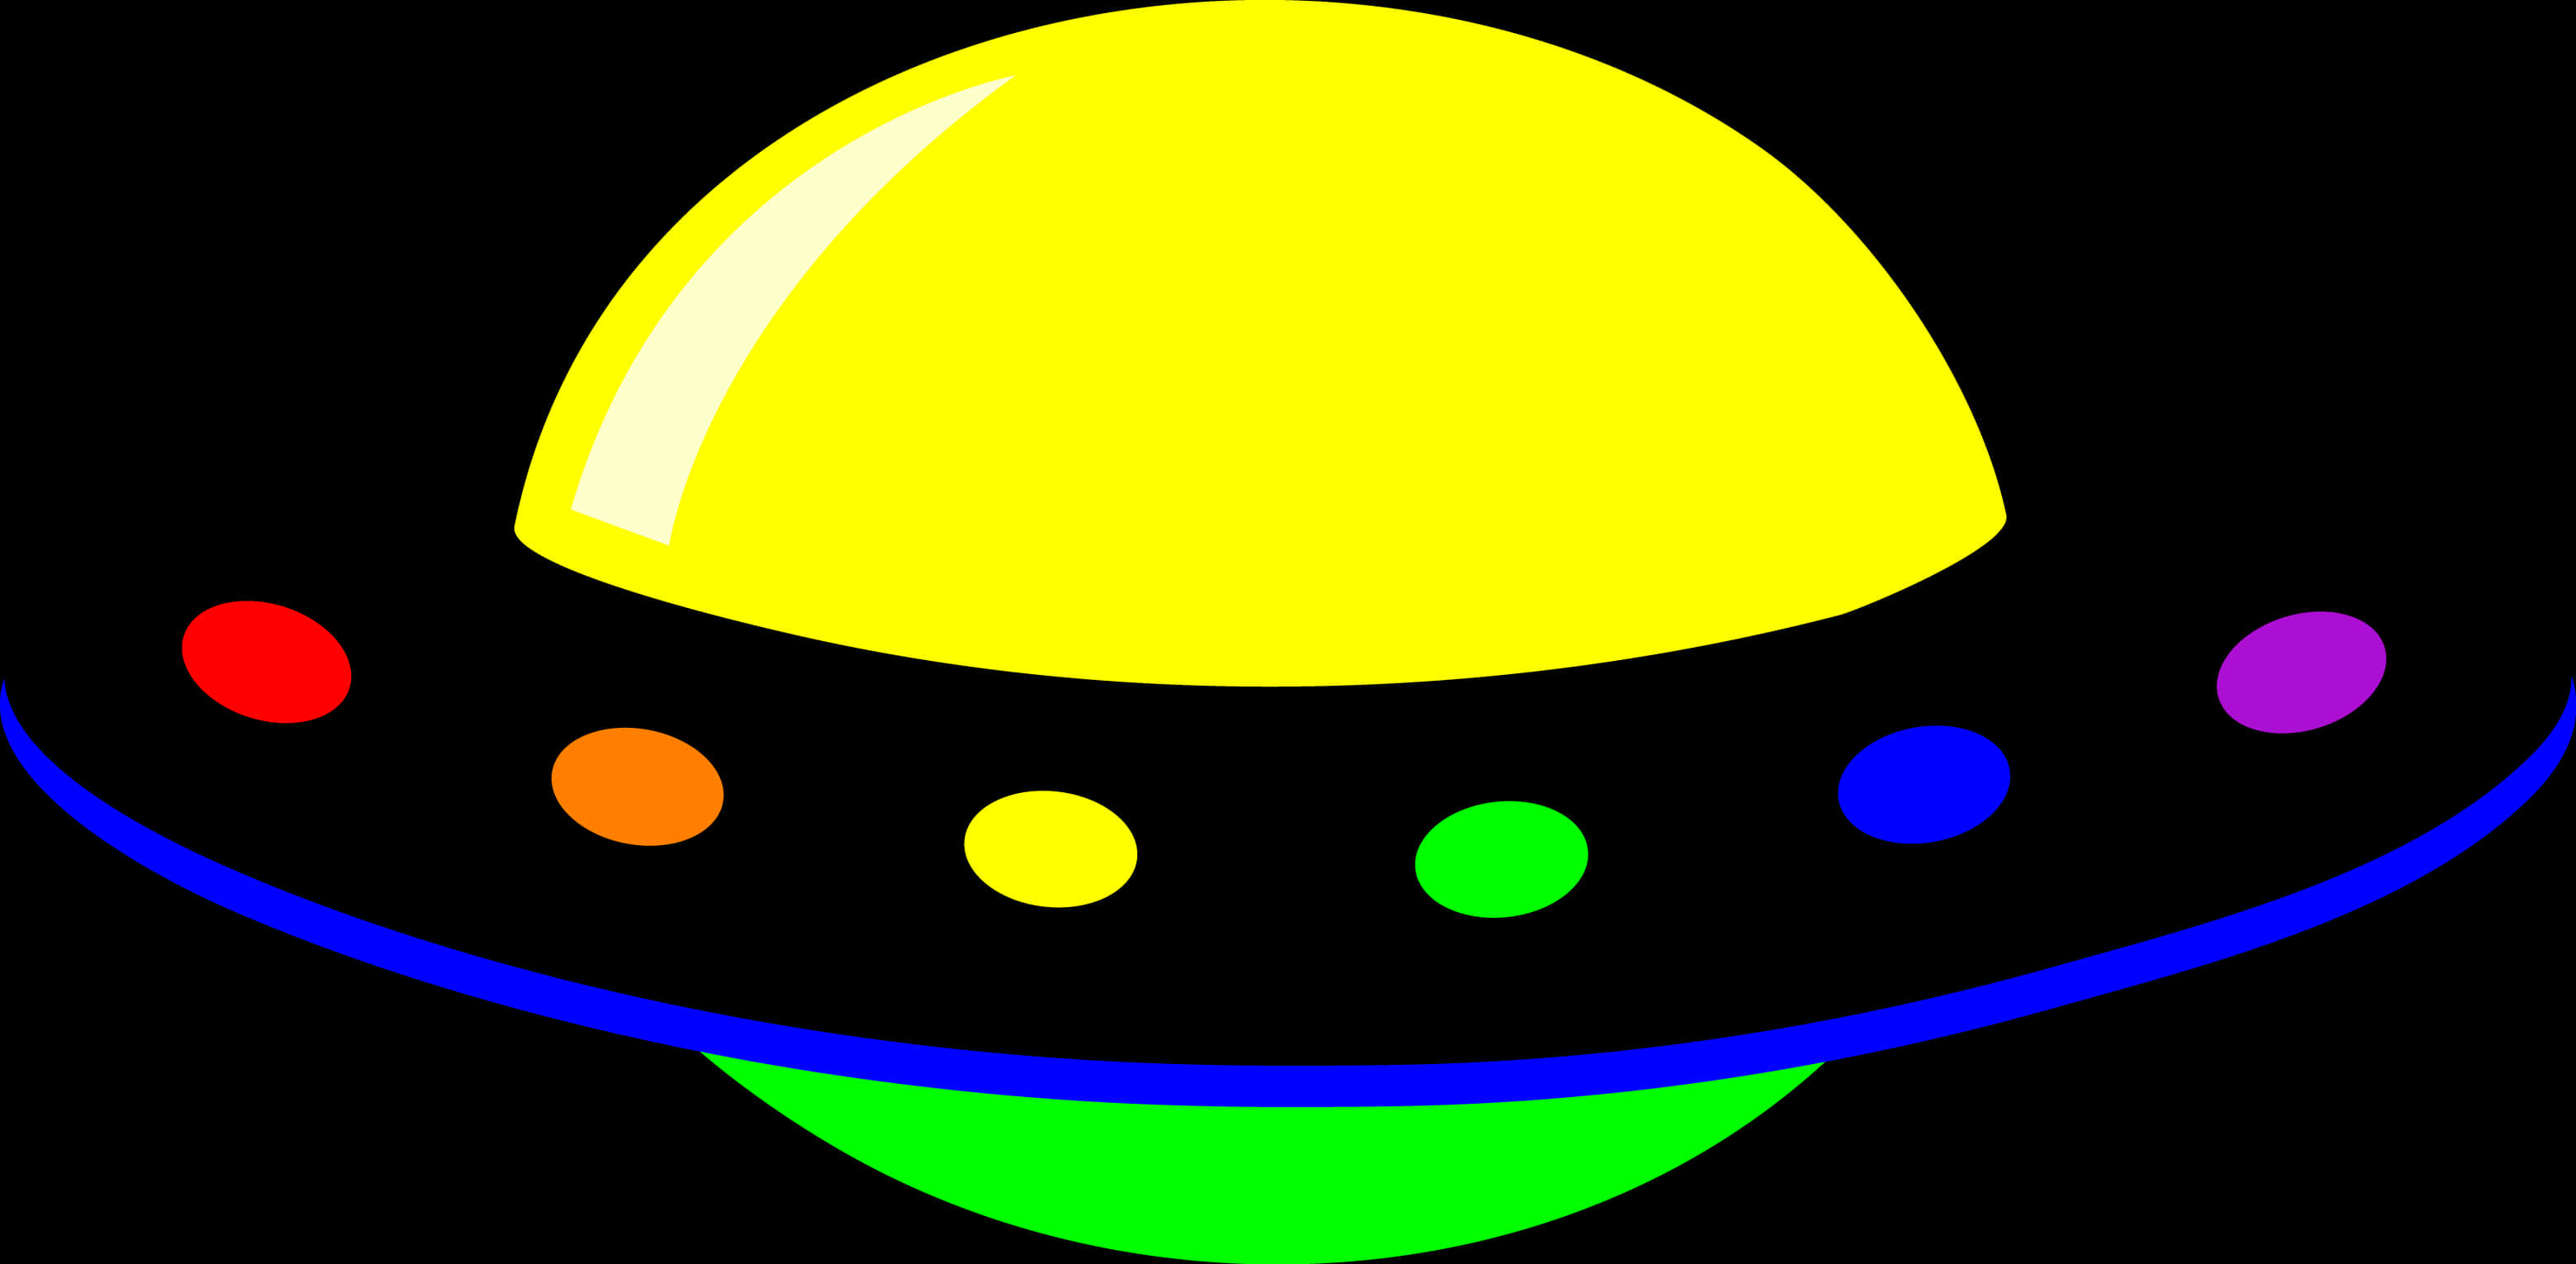 A Yellow Ufo With Multicolored Circles